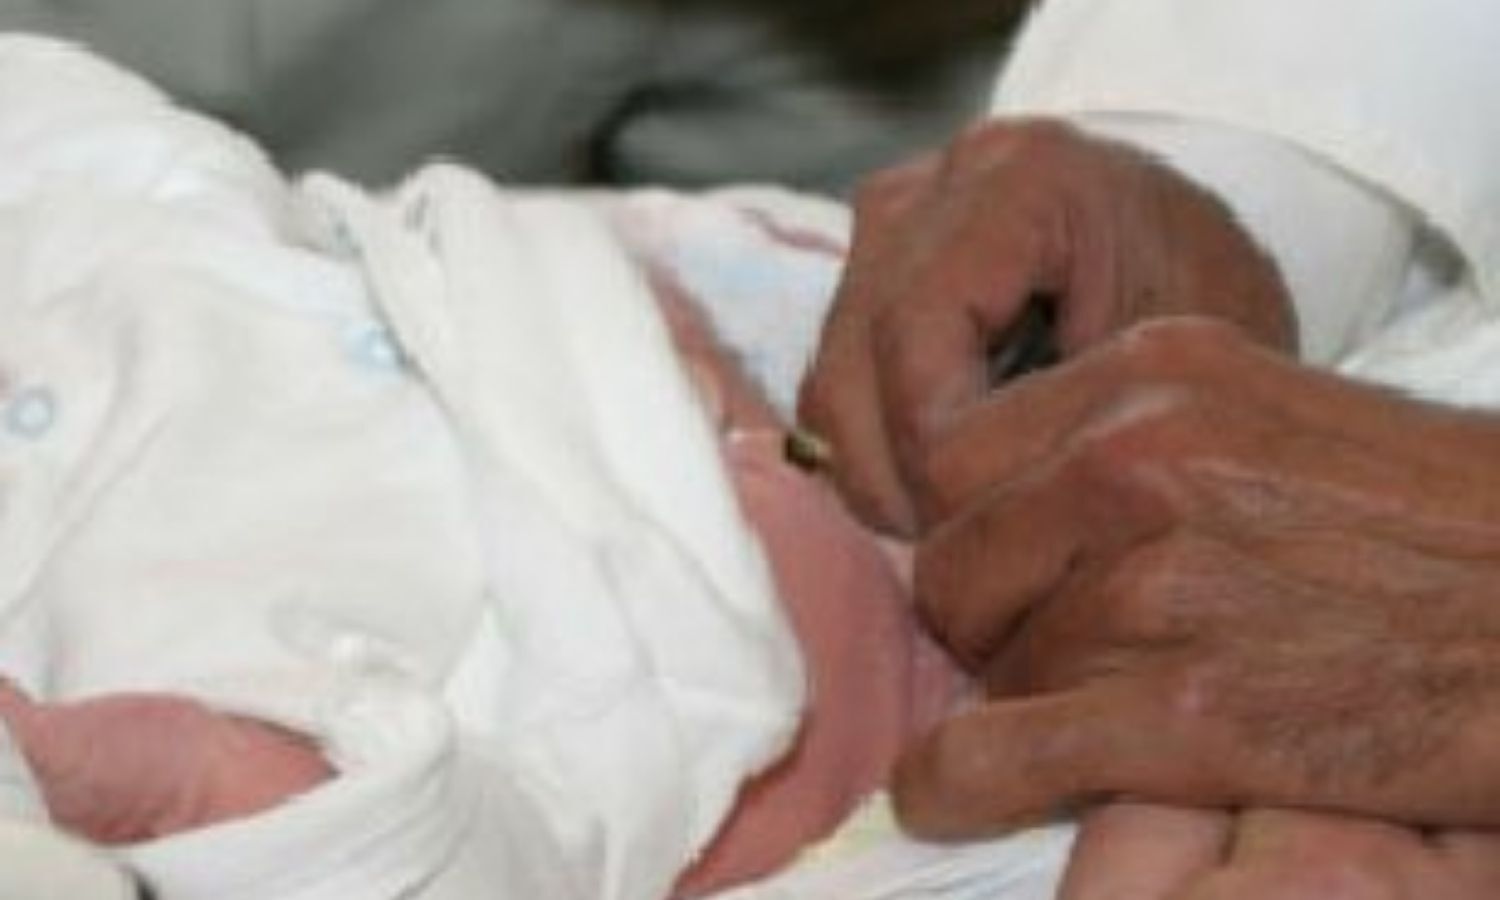 Serious complications, death after neonatal circumcision higher than believ...